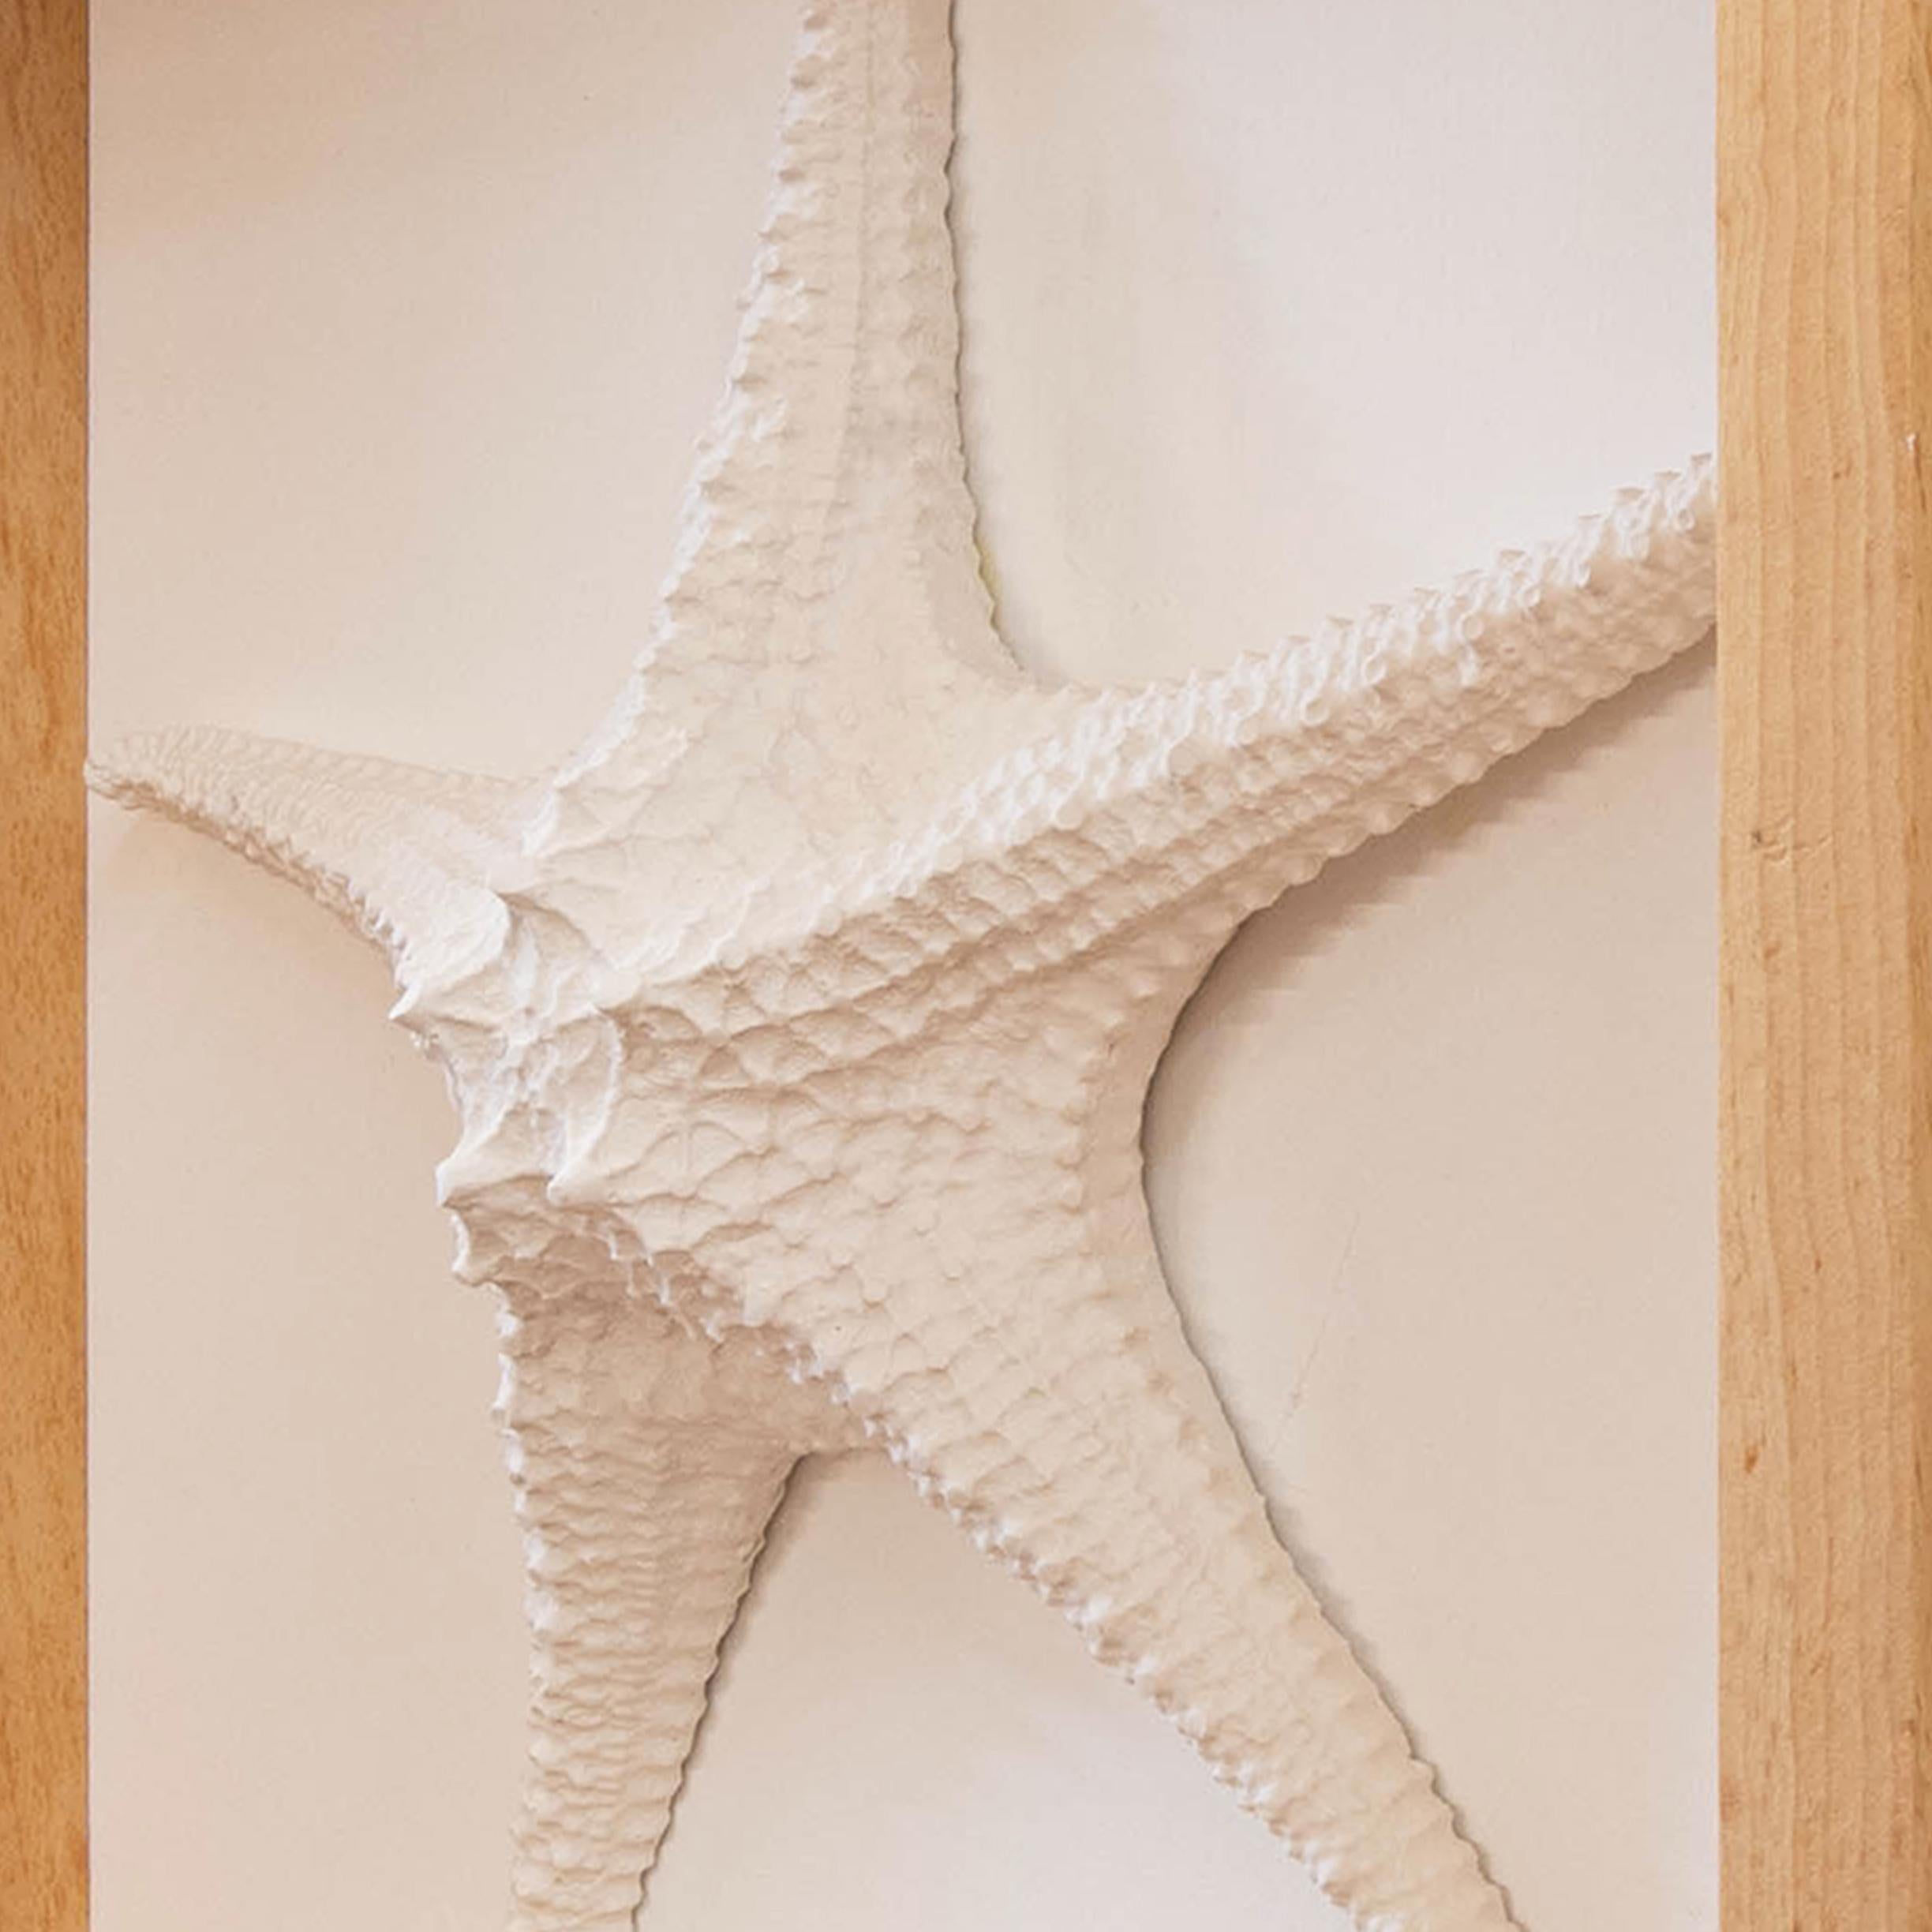 White Starfish Sculpture for Ocean Lovers. Wall Art - Contemporary Painting by Arozarena De La Fuente